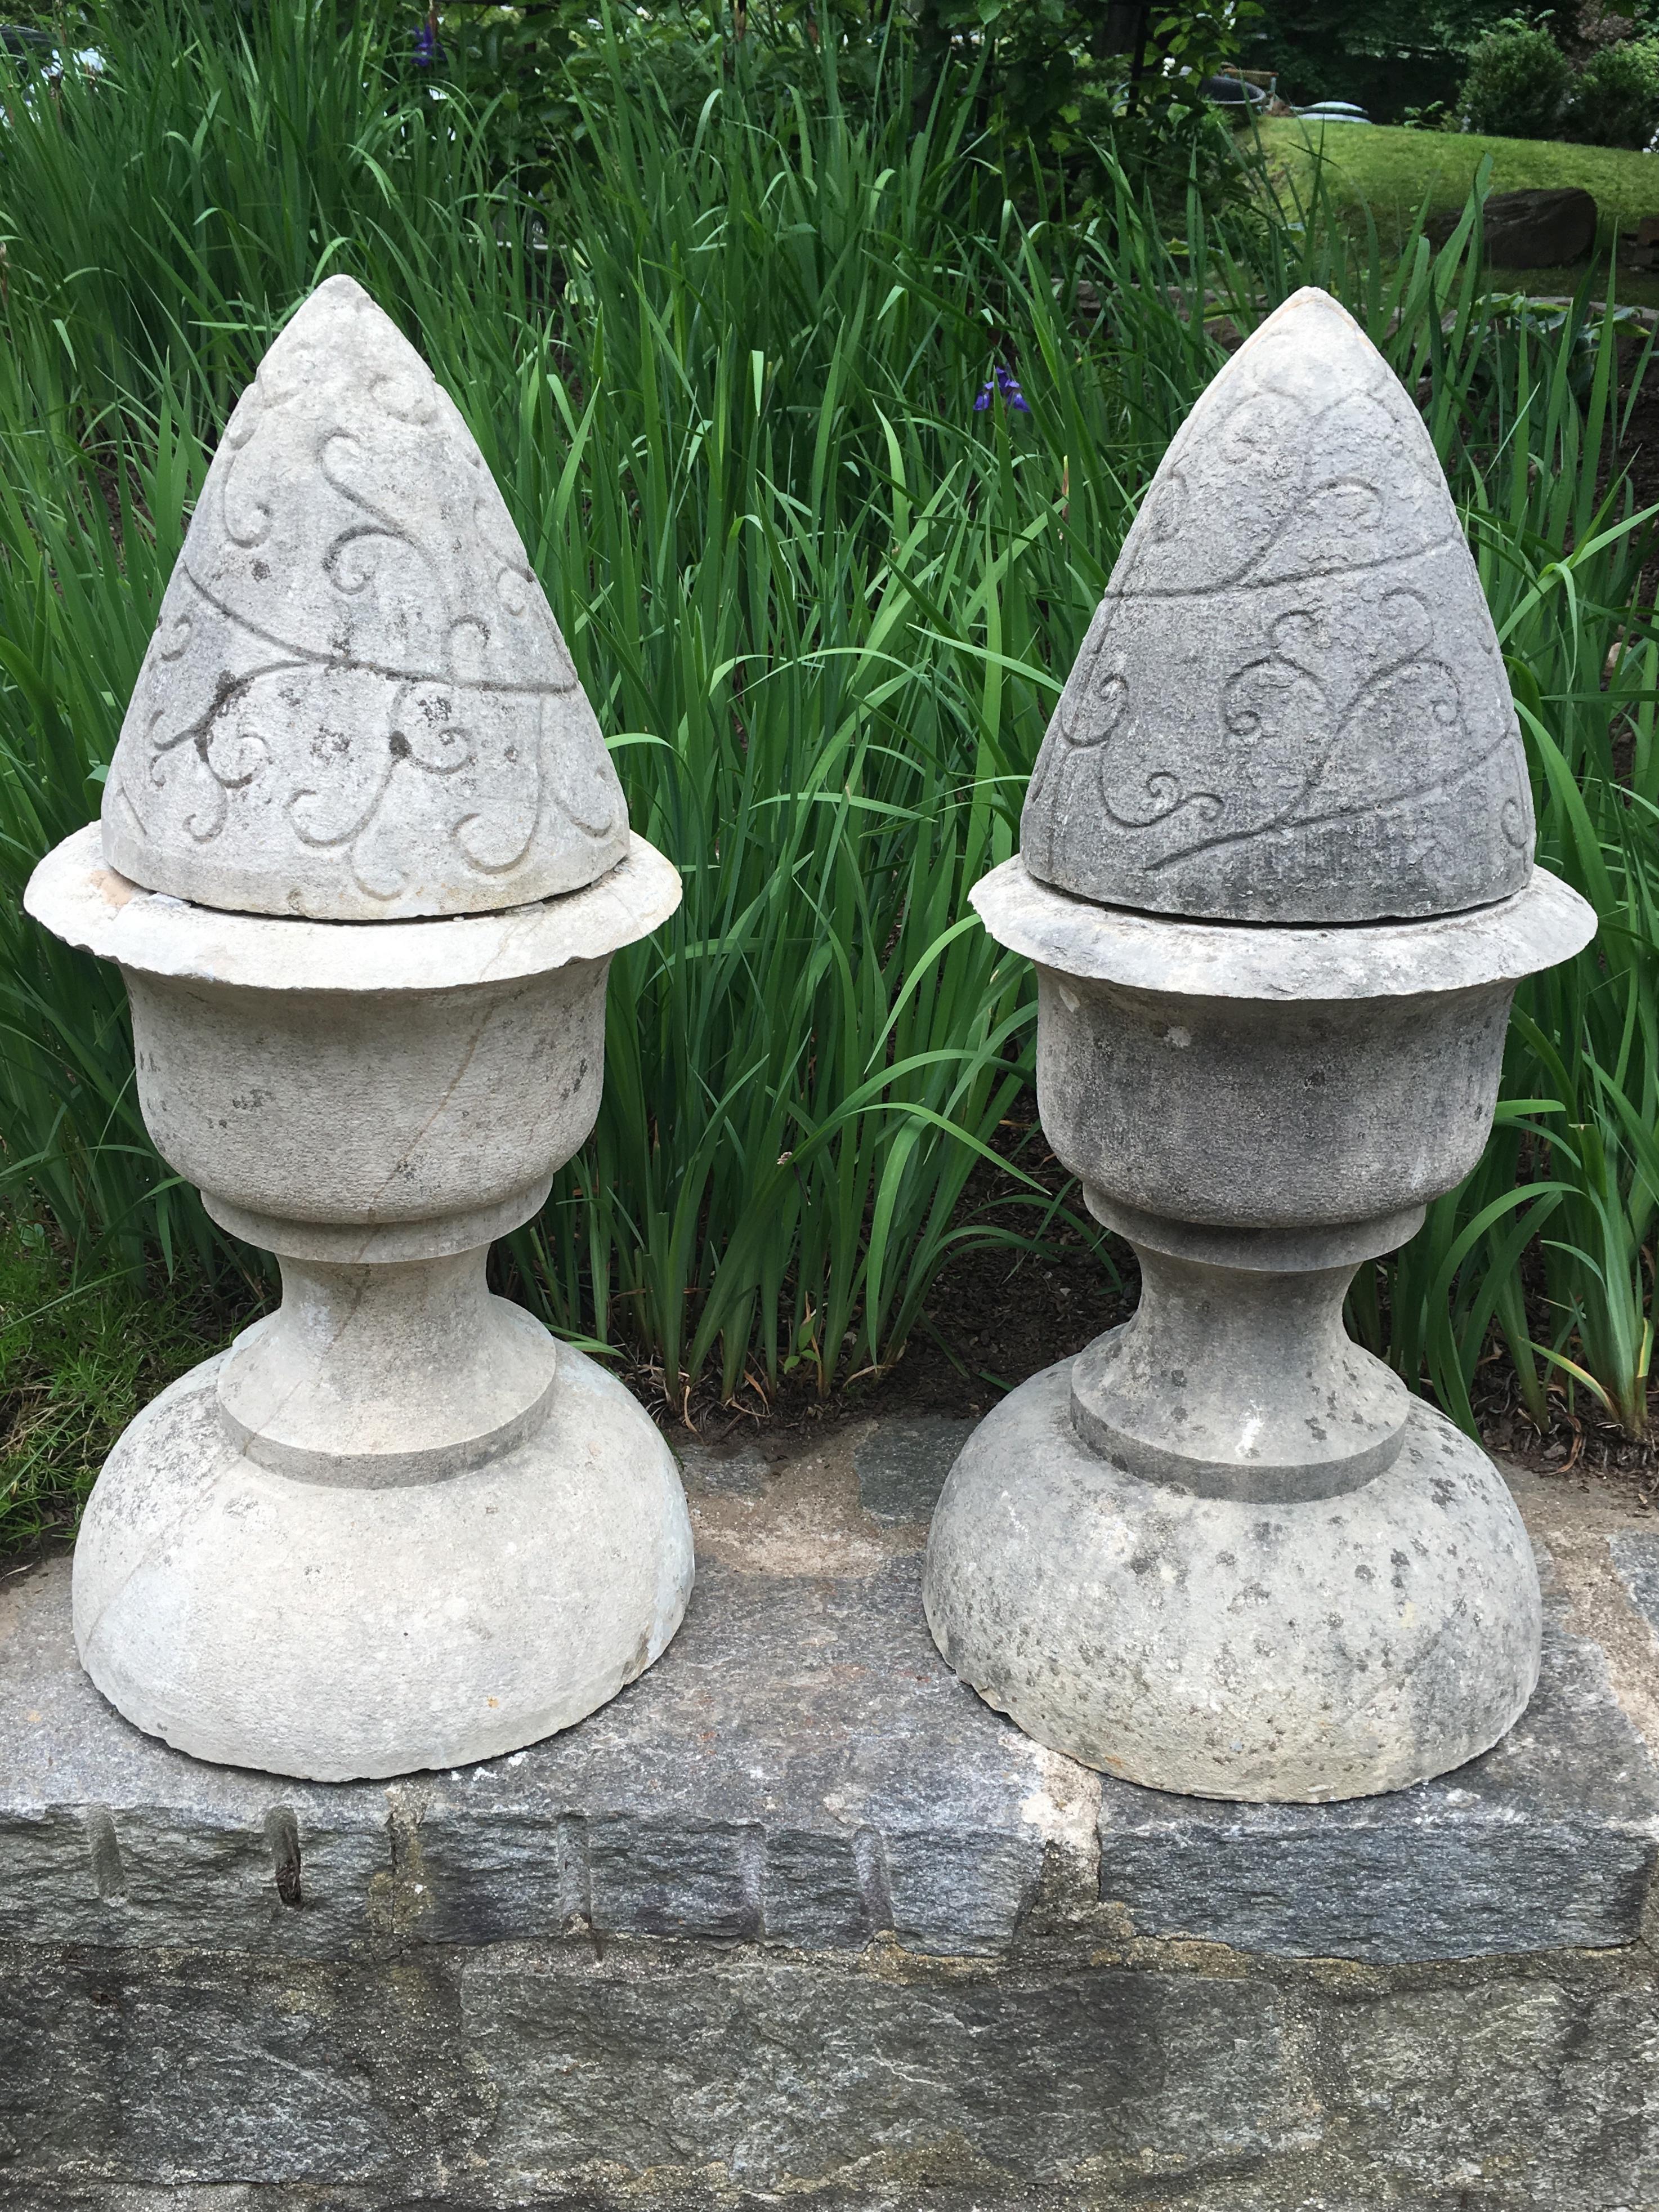 This pair of large finials (each in two parts) is hand-carved from French limestone and features a rare vine-design swirled incised decoration to the conical tops. Beautifully weathered to a pale grey, they will make a stunning statement perched